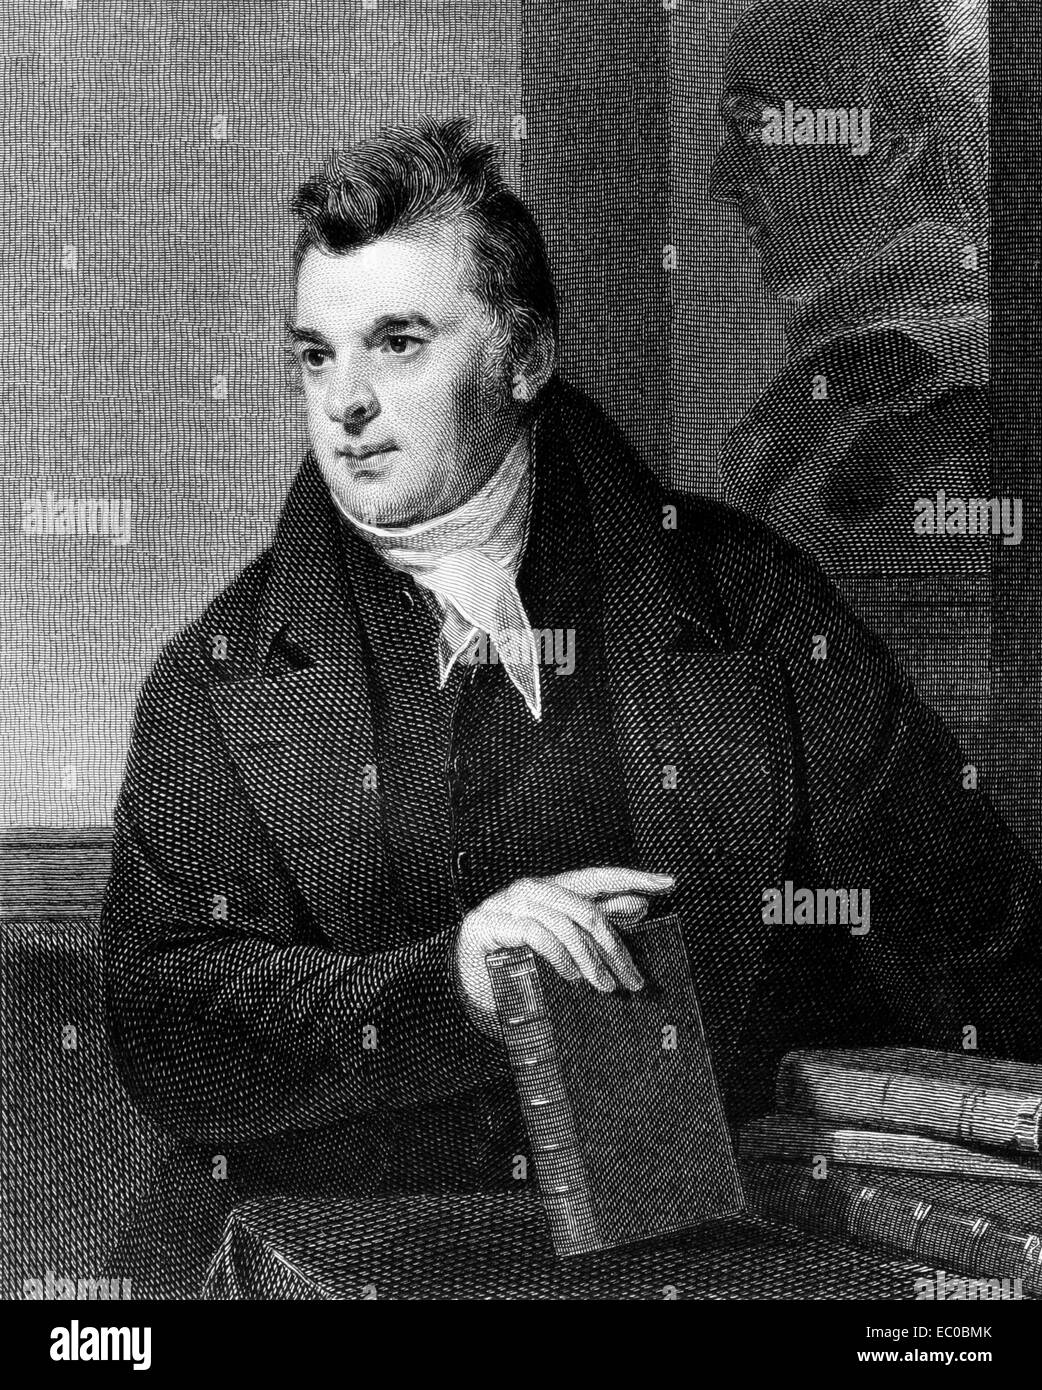 David Hosack (1769-1835) on engraving from 1835. Noted physician, botanist and educator. Stock Photo